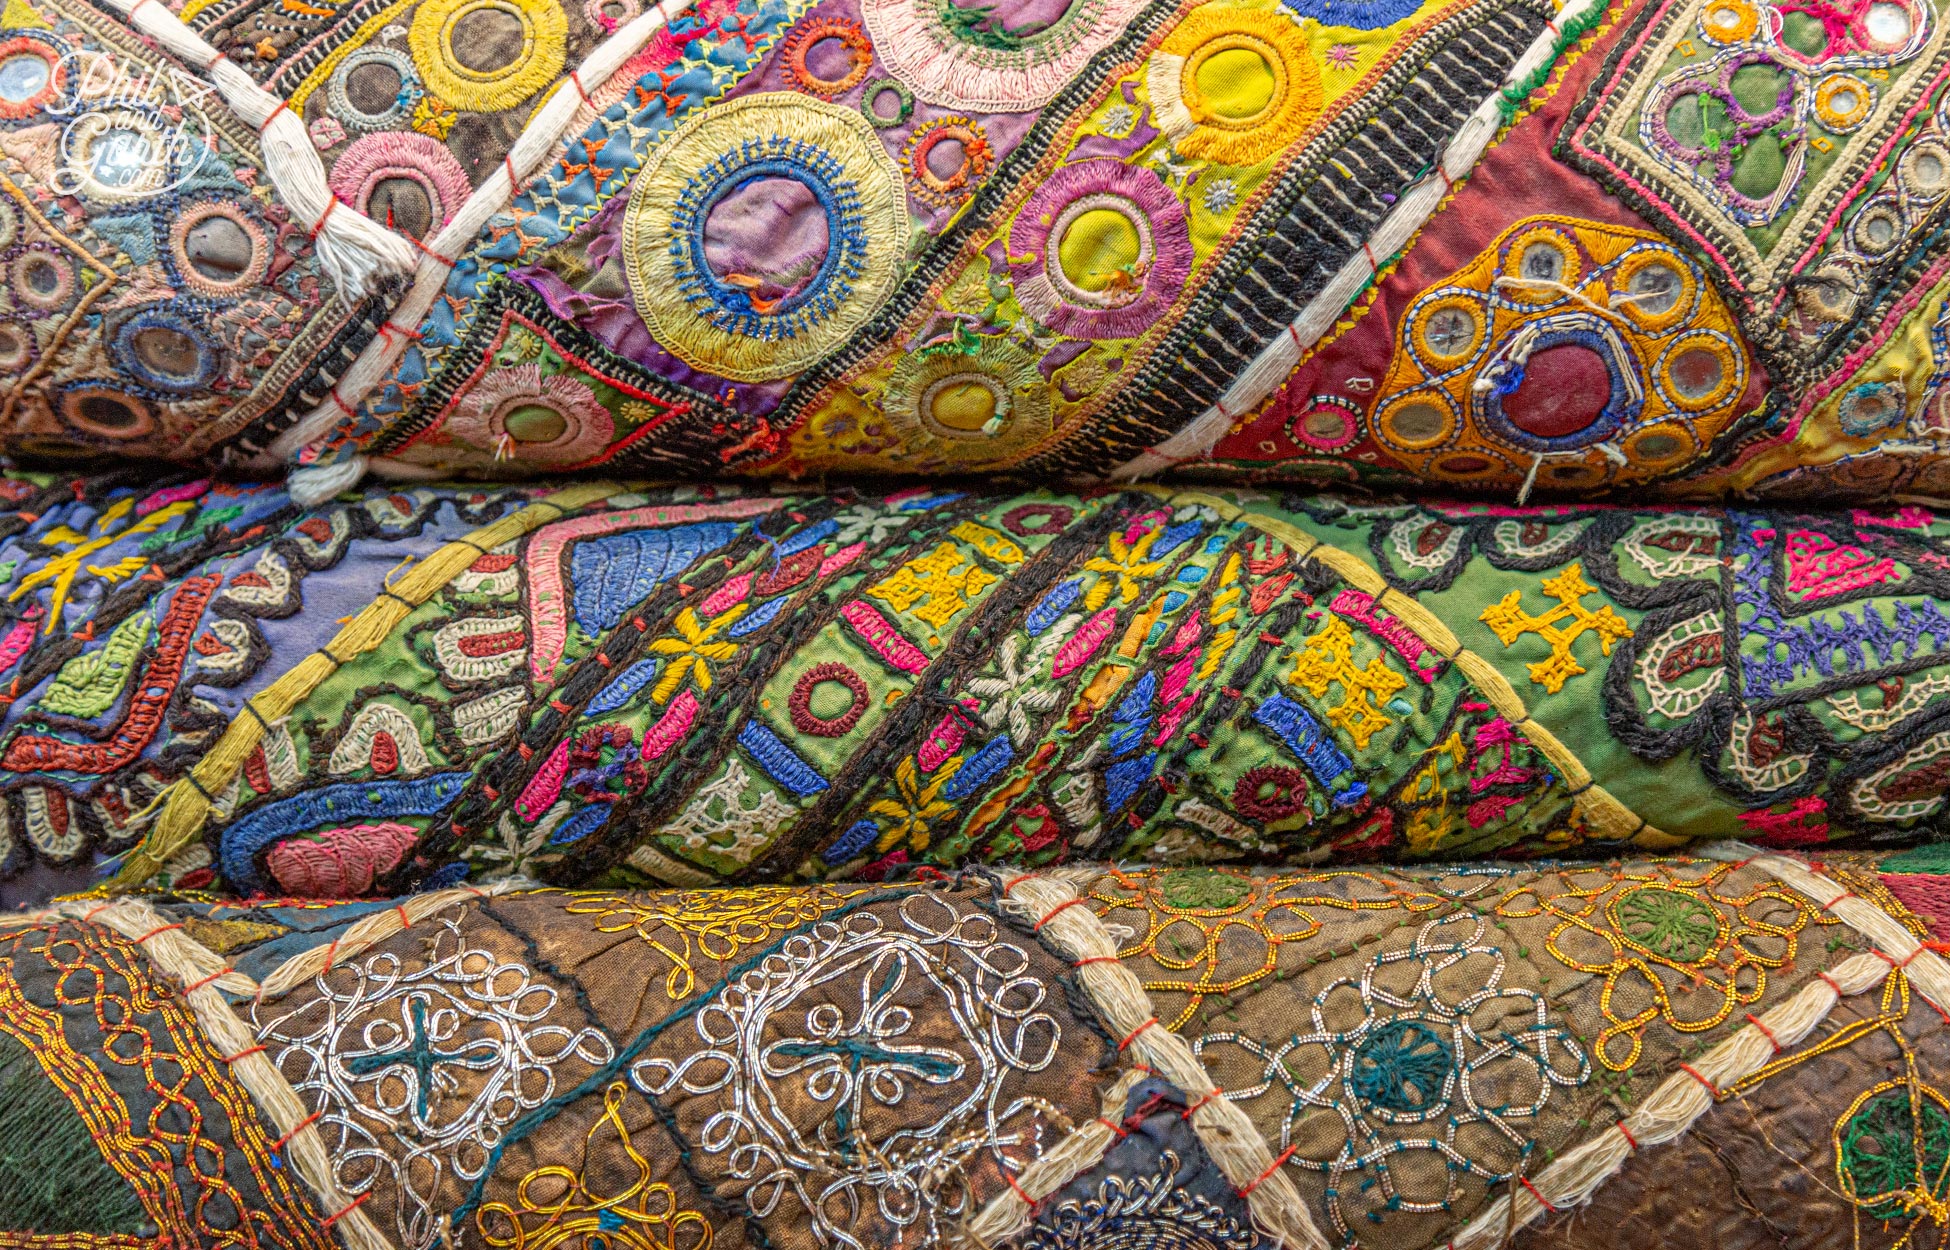 Wonderful Indian textiles and colour